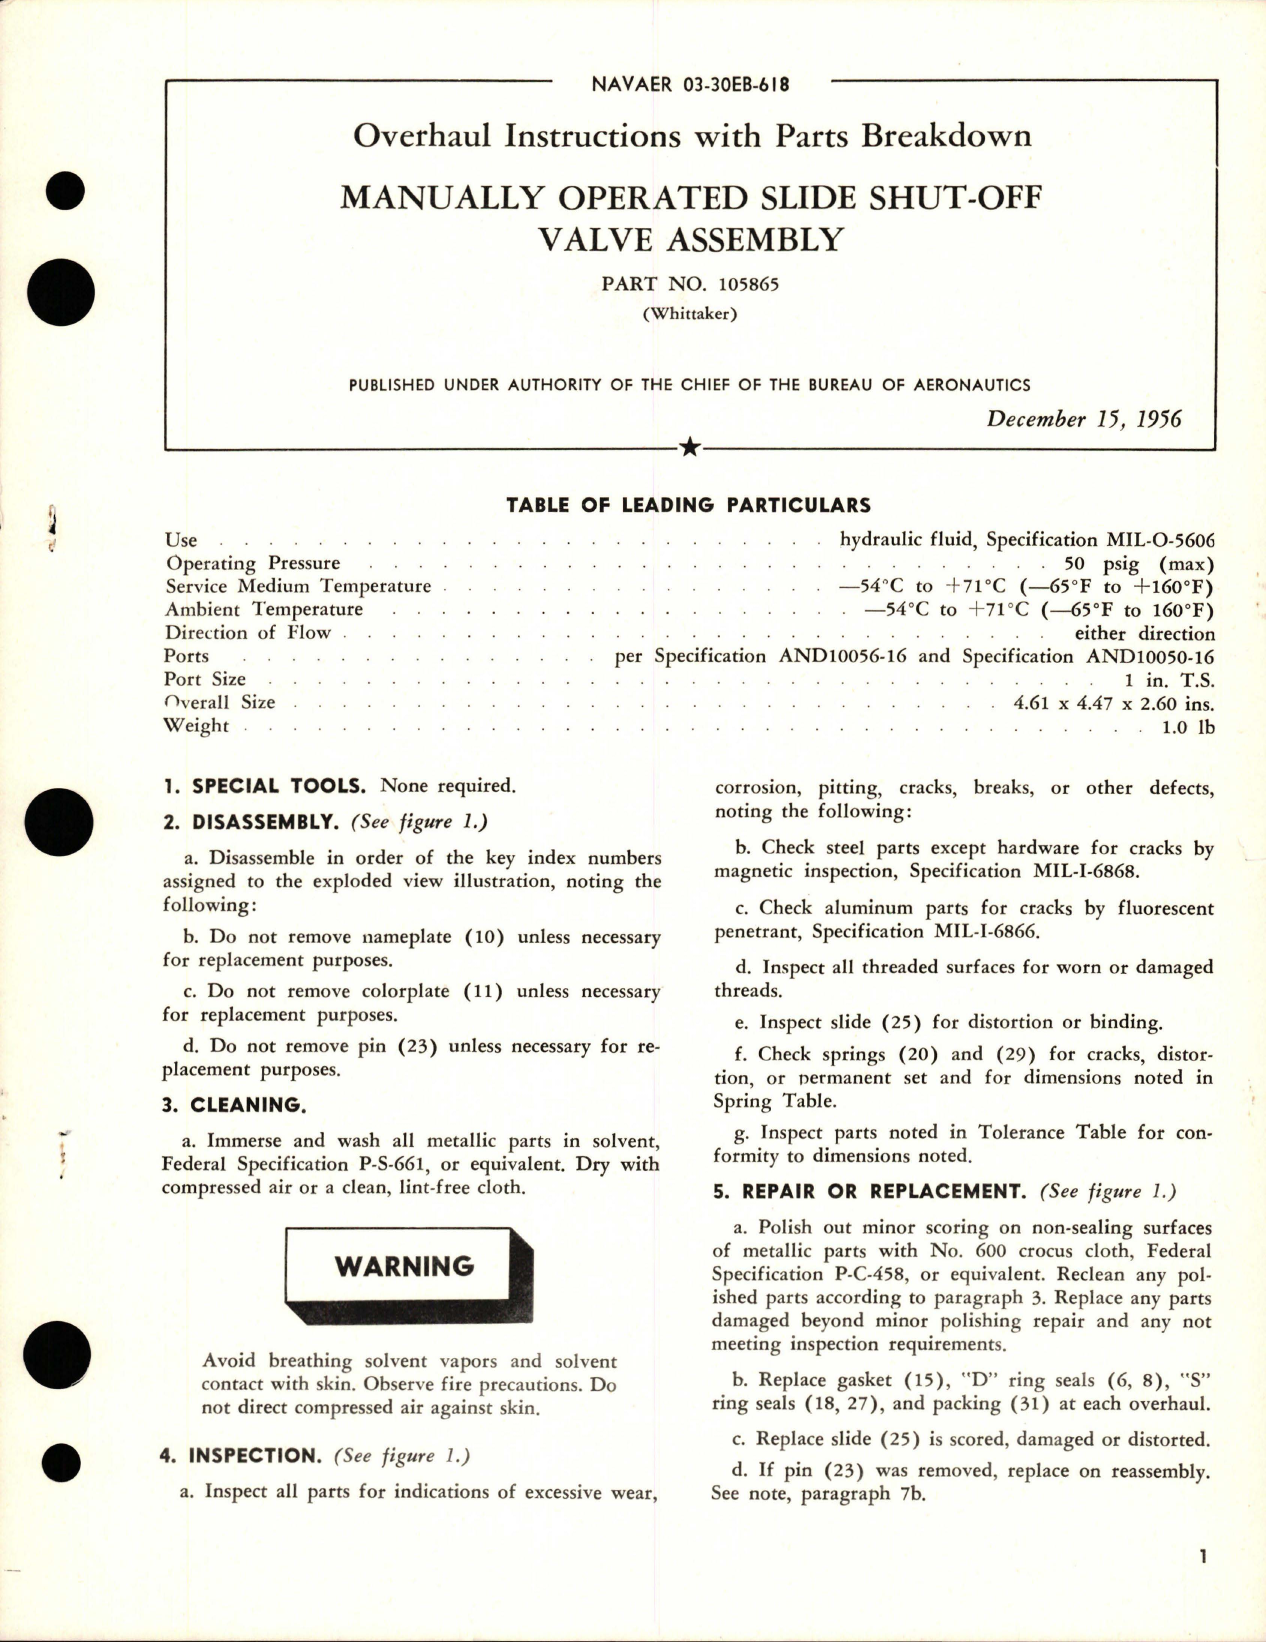 Sample page 1 from AirCorps Library document: Overhaul Instructions with Parts Breakdown for Manually Operated Slide Shut-Off Valve Assembly - Part 105865